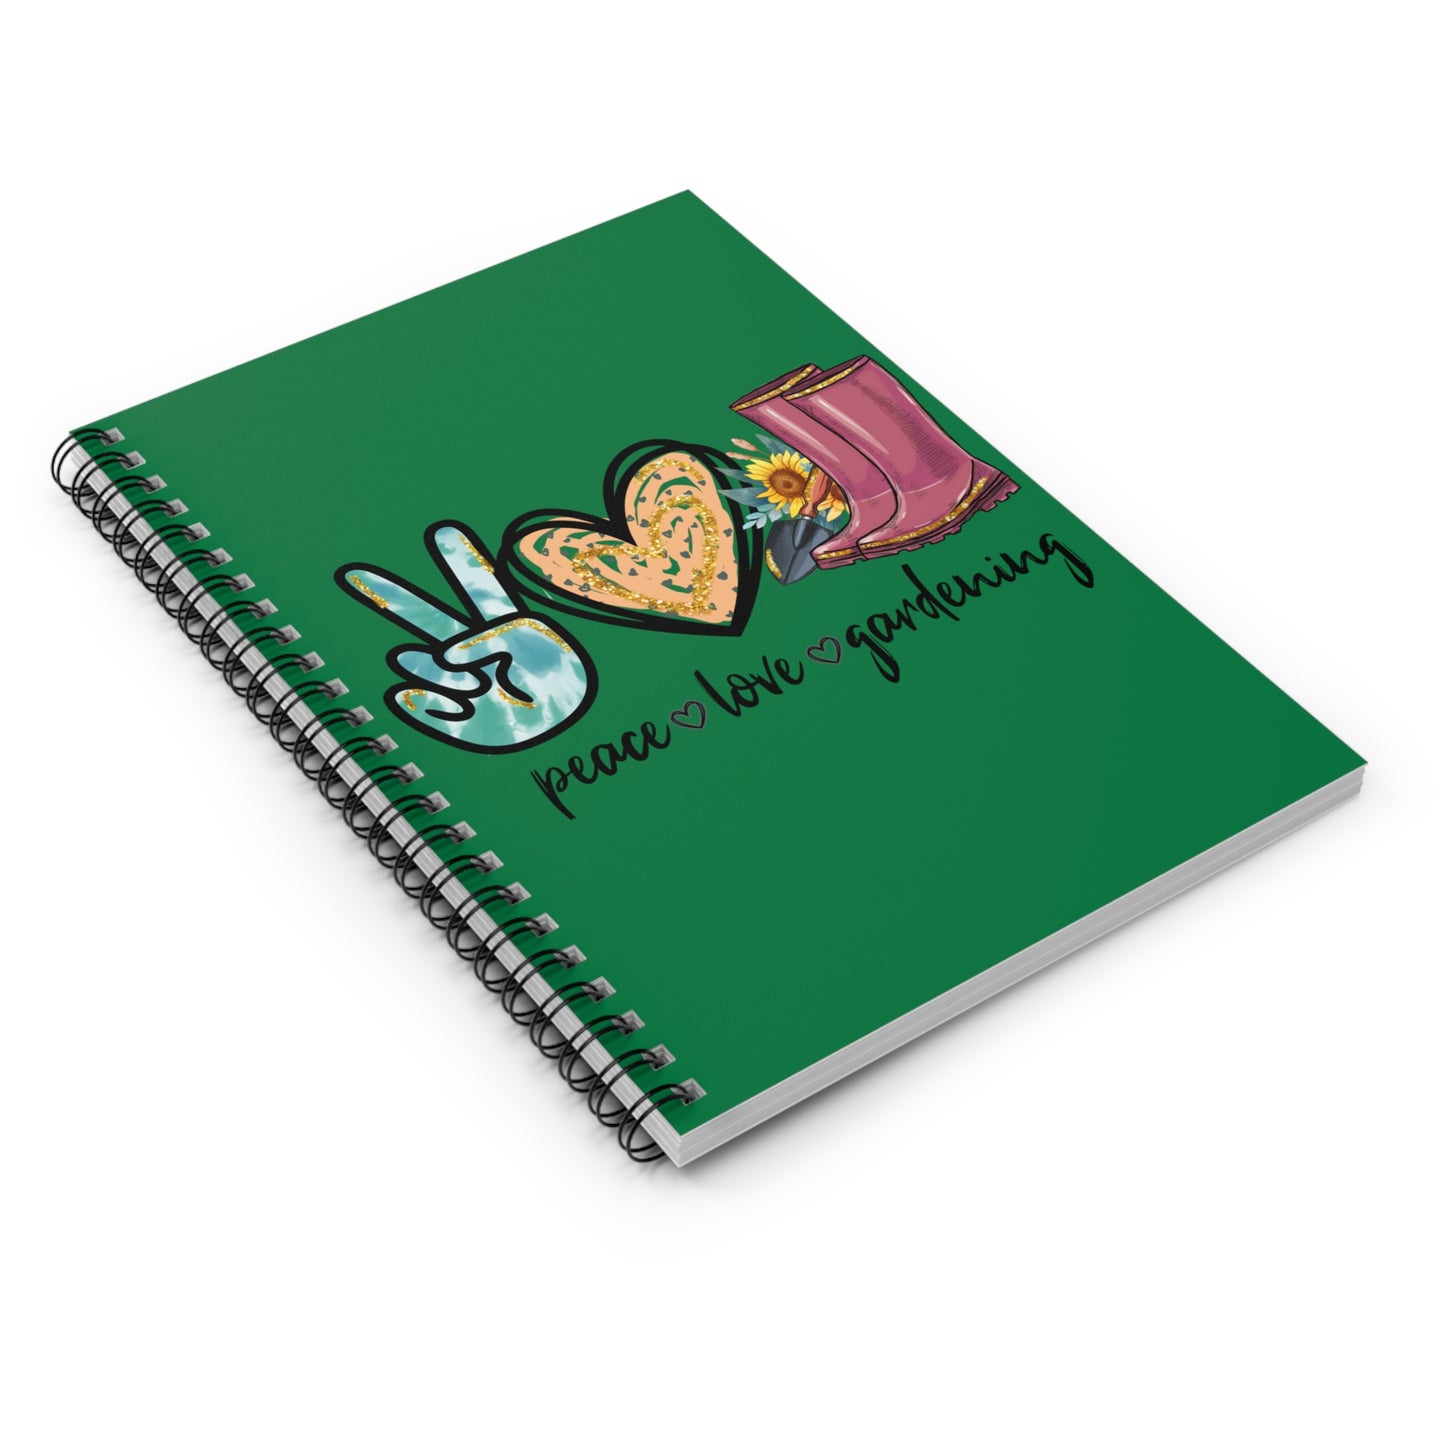 Peace - Love - Gardening: Spiral Notebook - Log Books - Journals - Diaries - and More Custom Printed by TheGlassyLass.com